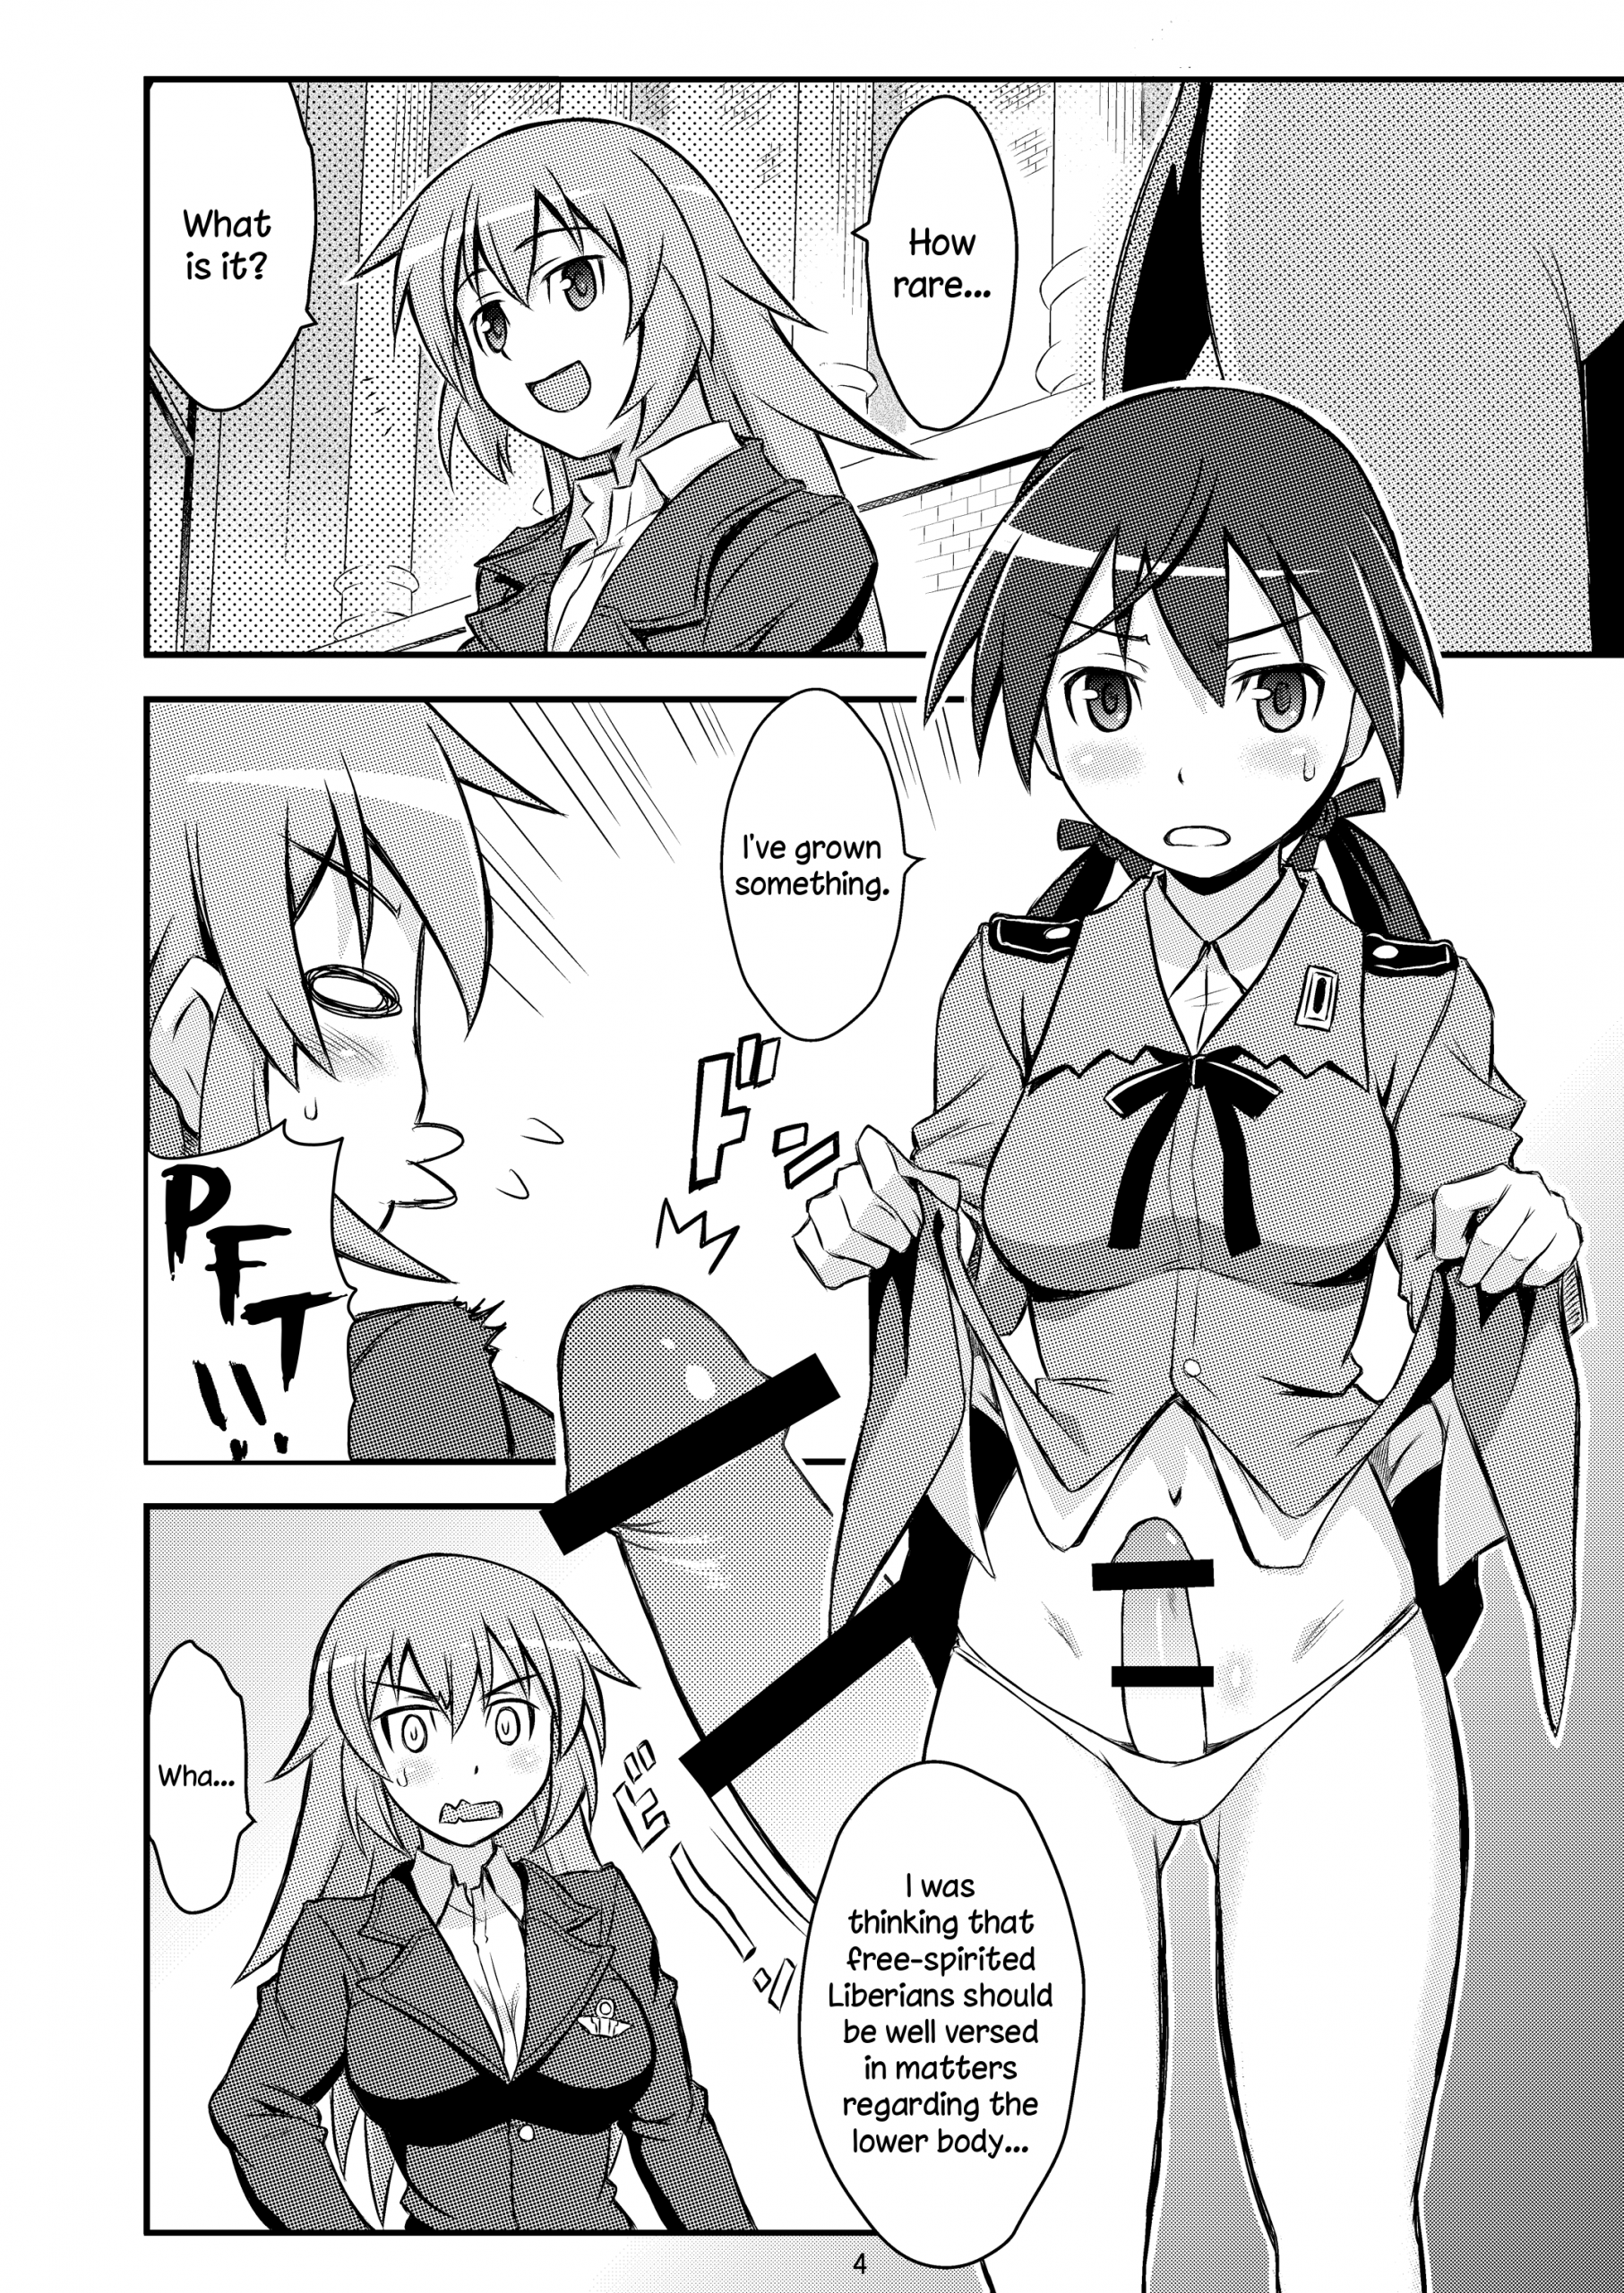 Shir and Gert in Big Trouble hentai manga picture 3